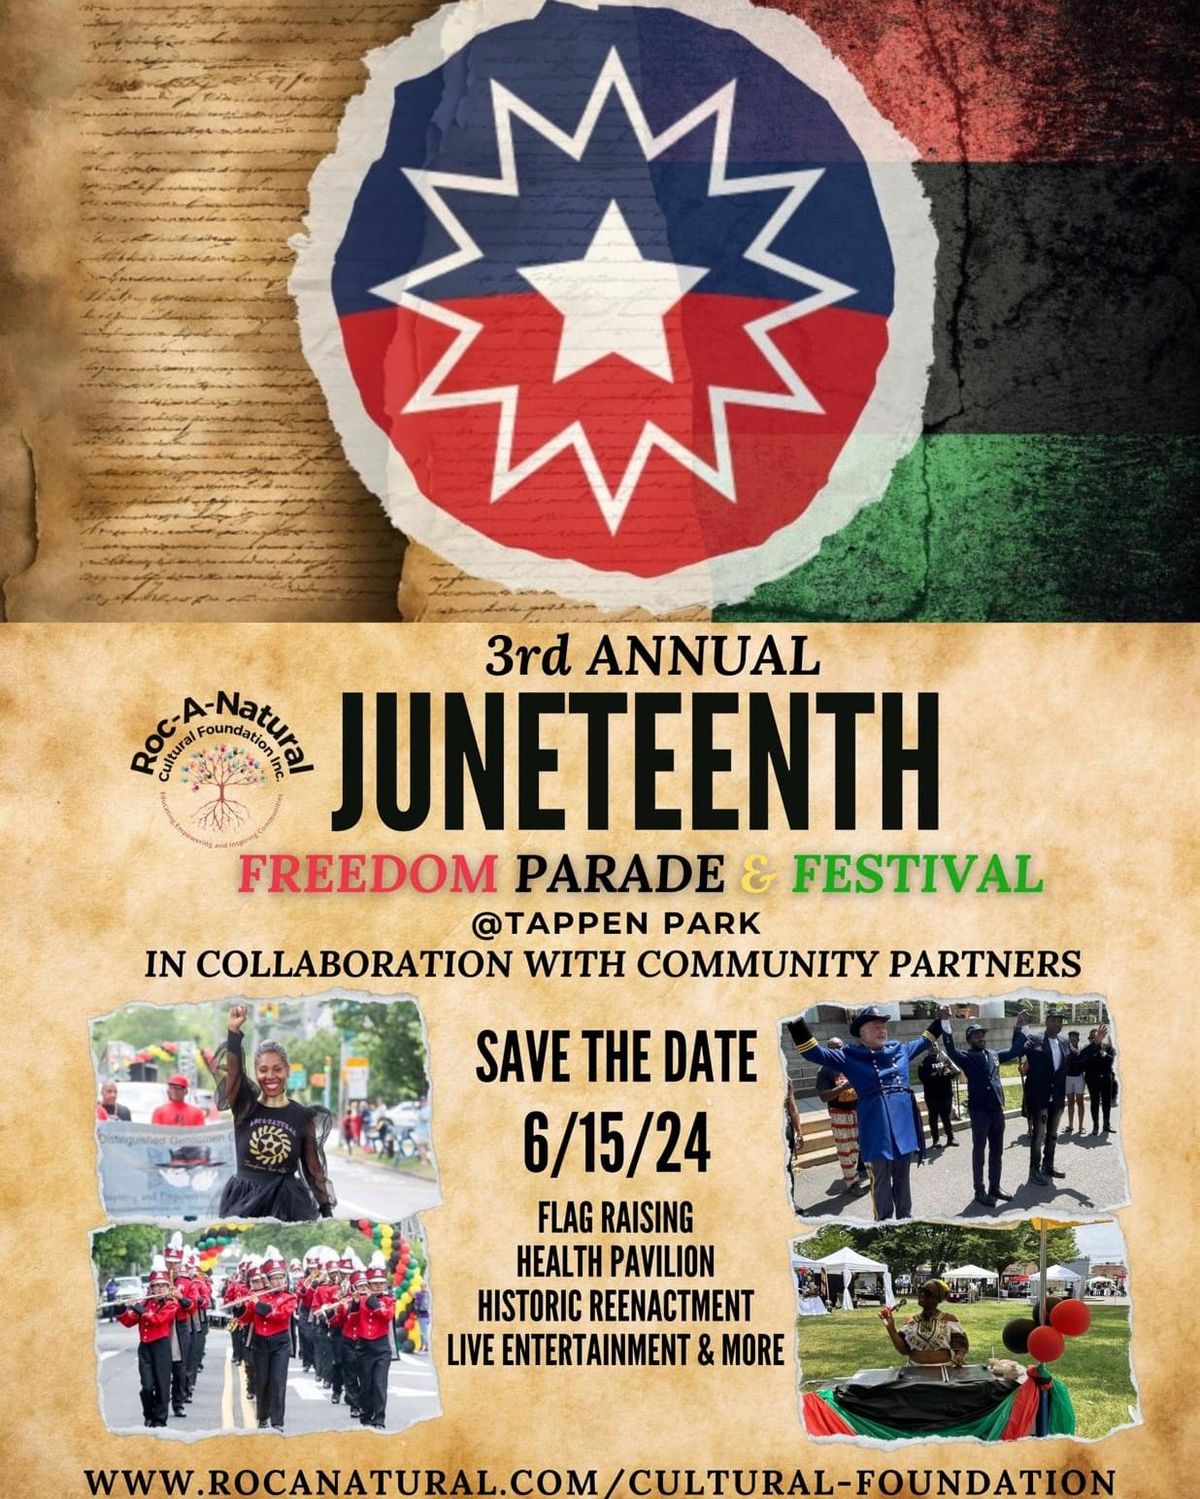 3rd Annual Juneteenth Freedom Parade & Festival 